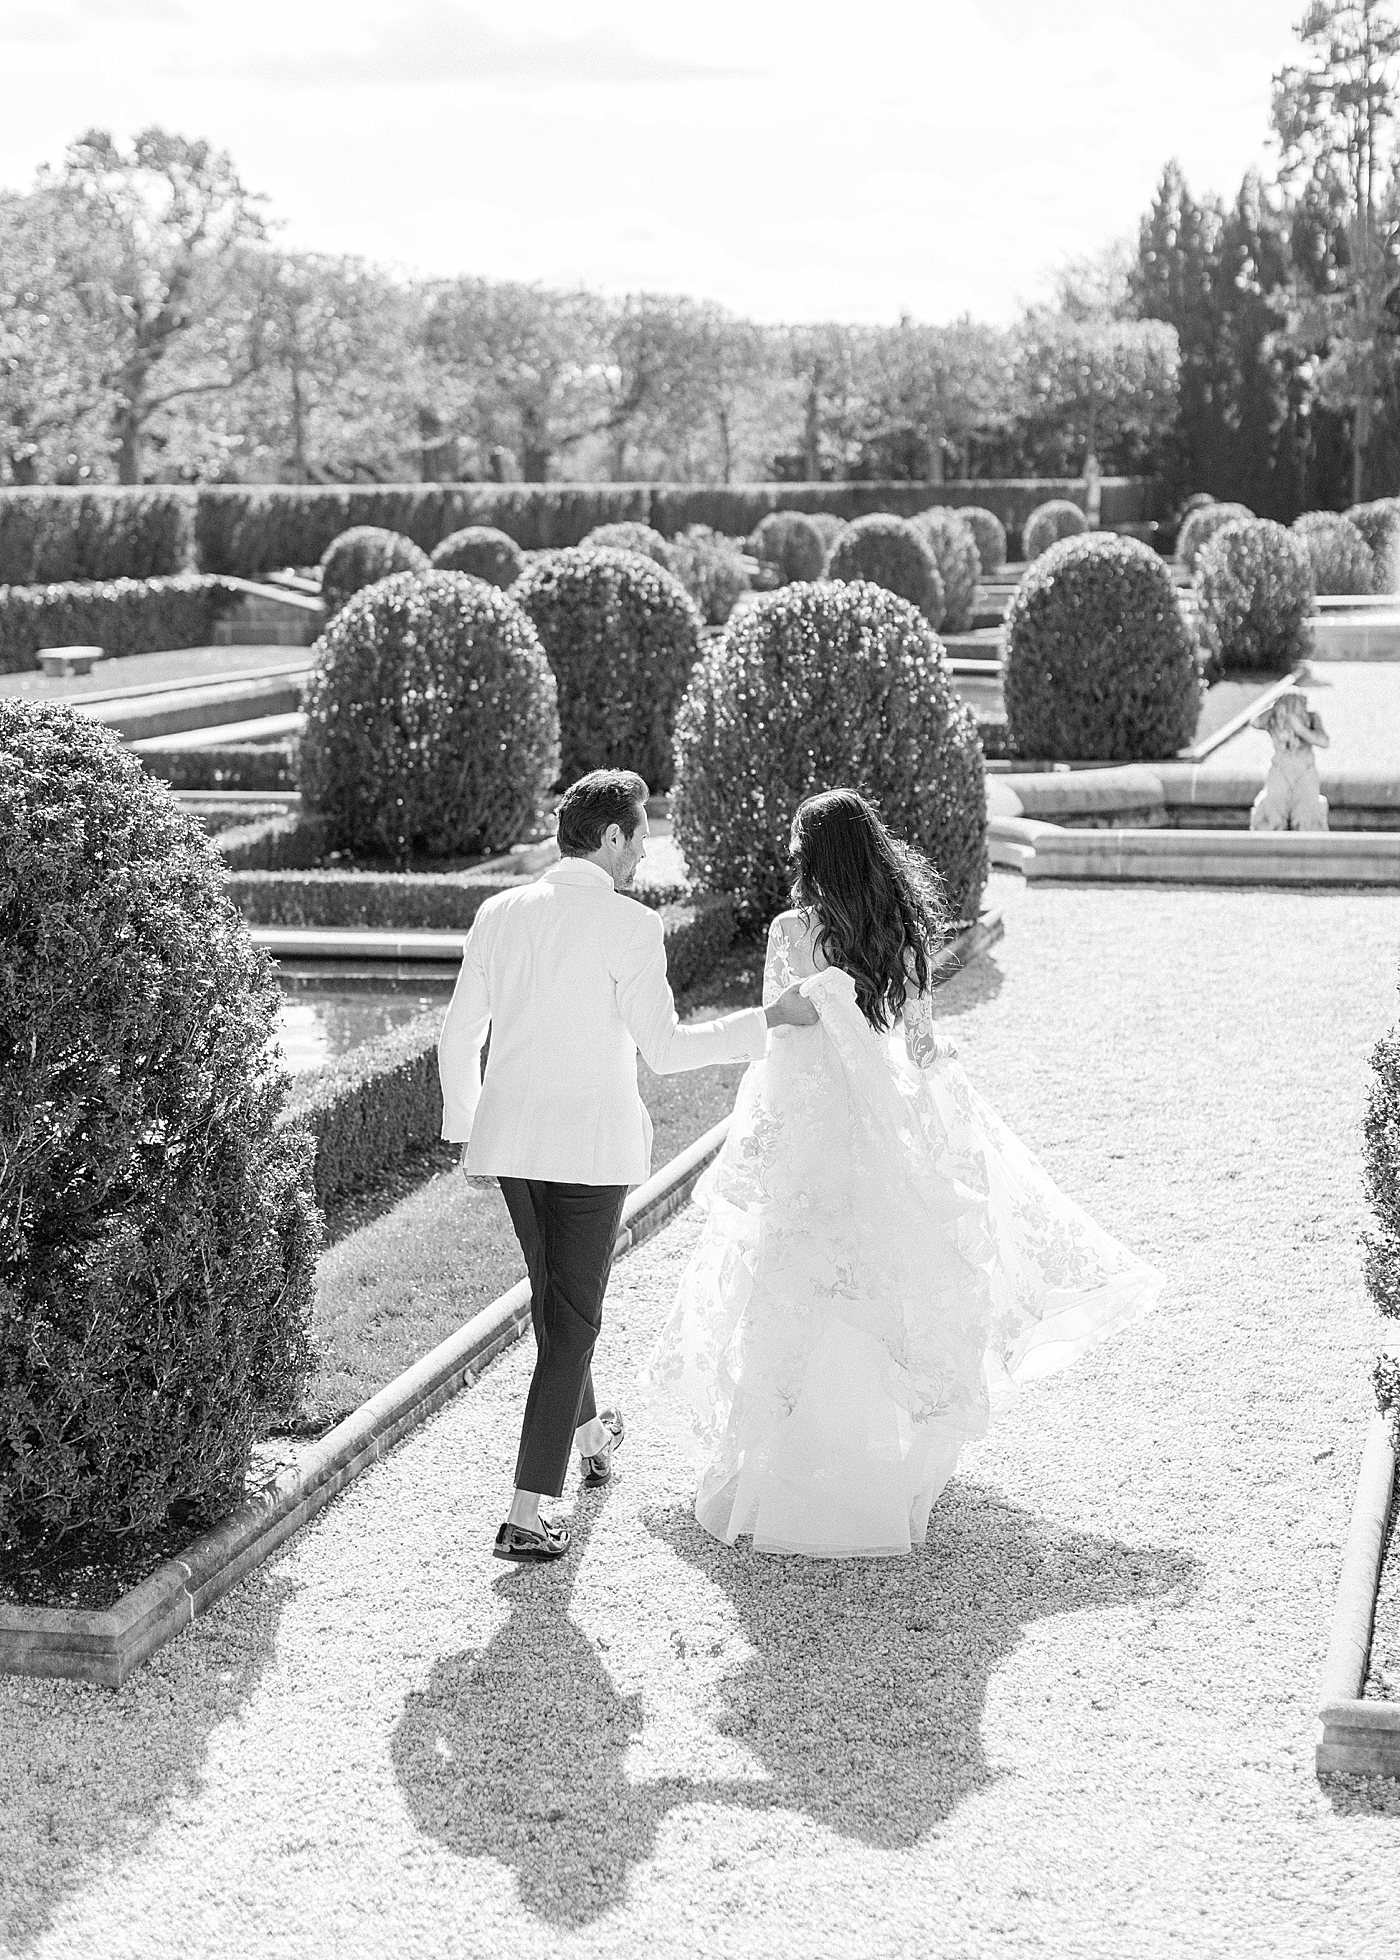 Black and white image of a bride and groom walking away from the camera in a European garden during Oheka castle wedding | Image by Hope Helmuth Photography